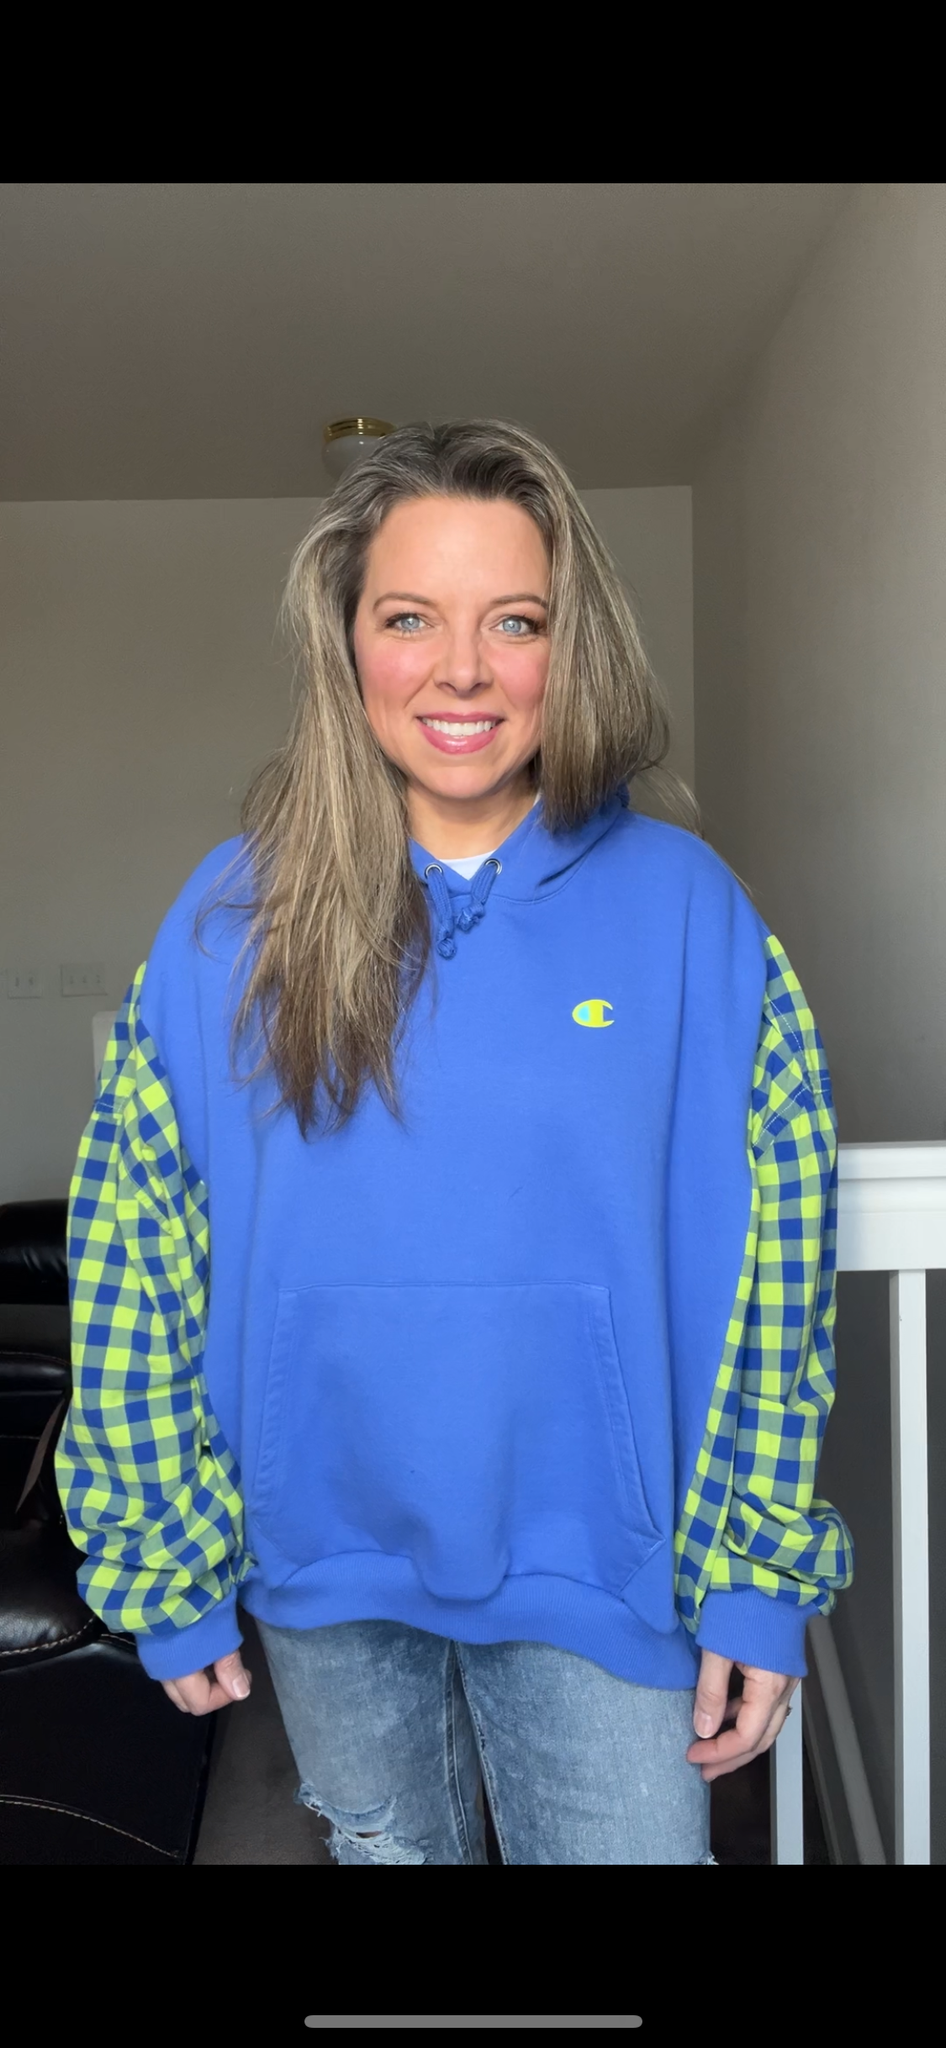 Upcycled Blue Champion – women’s XL – soft thick sweatshirt with thin cotton sleeves ￼